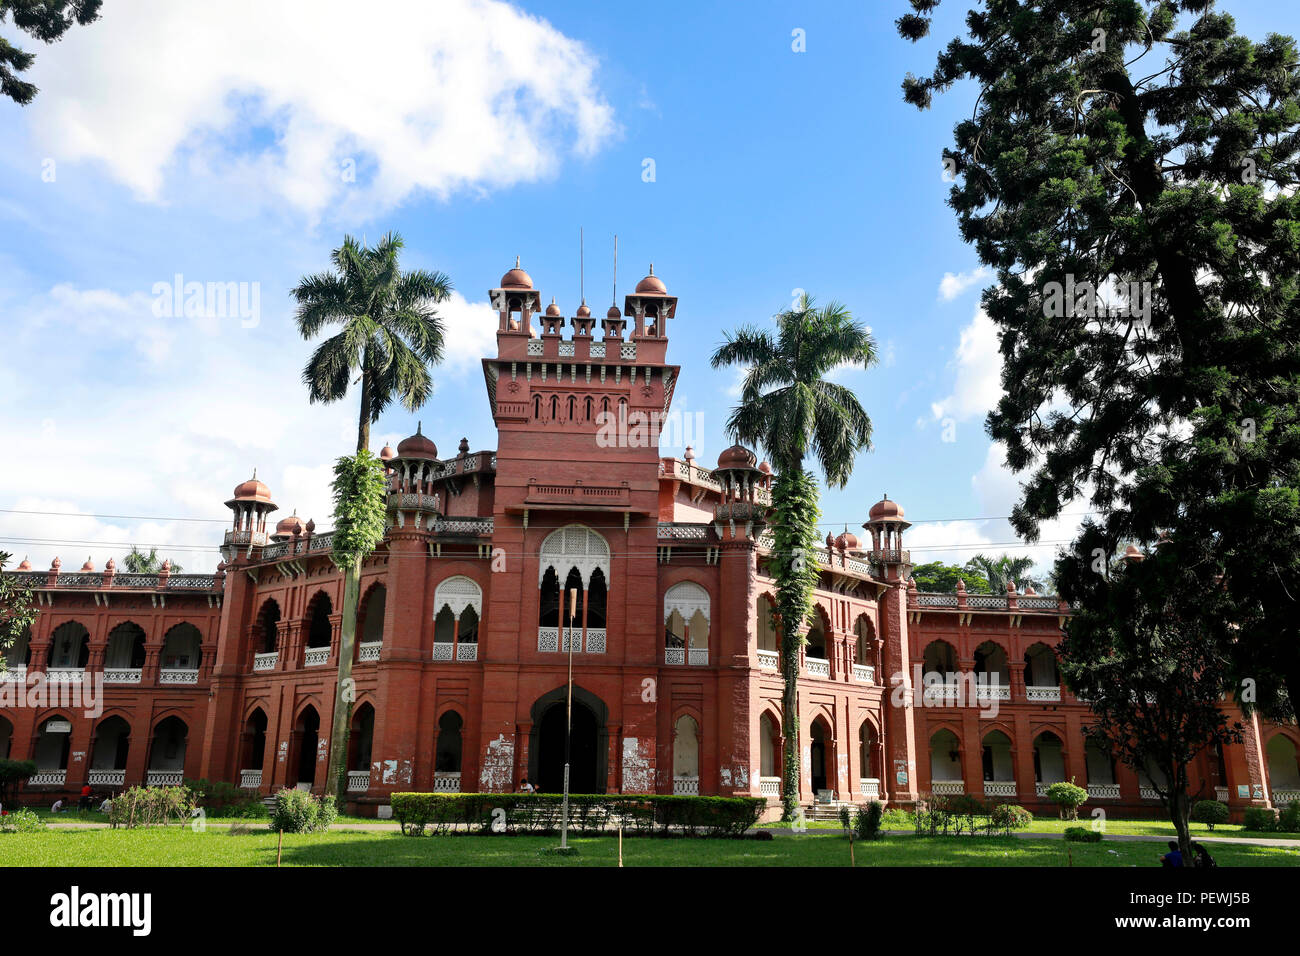 Dhaka, Bangladesh - August 15, 2018: The Curzon Hall is a British Raj-era building and home of the Faculty of Science at the University of Dhaka. The  Stock Photo